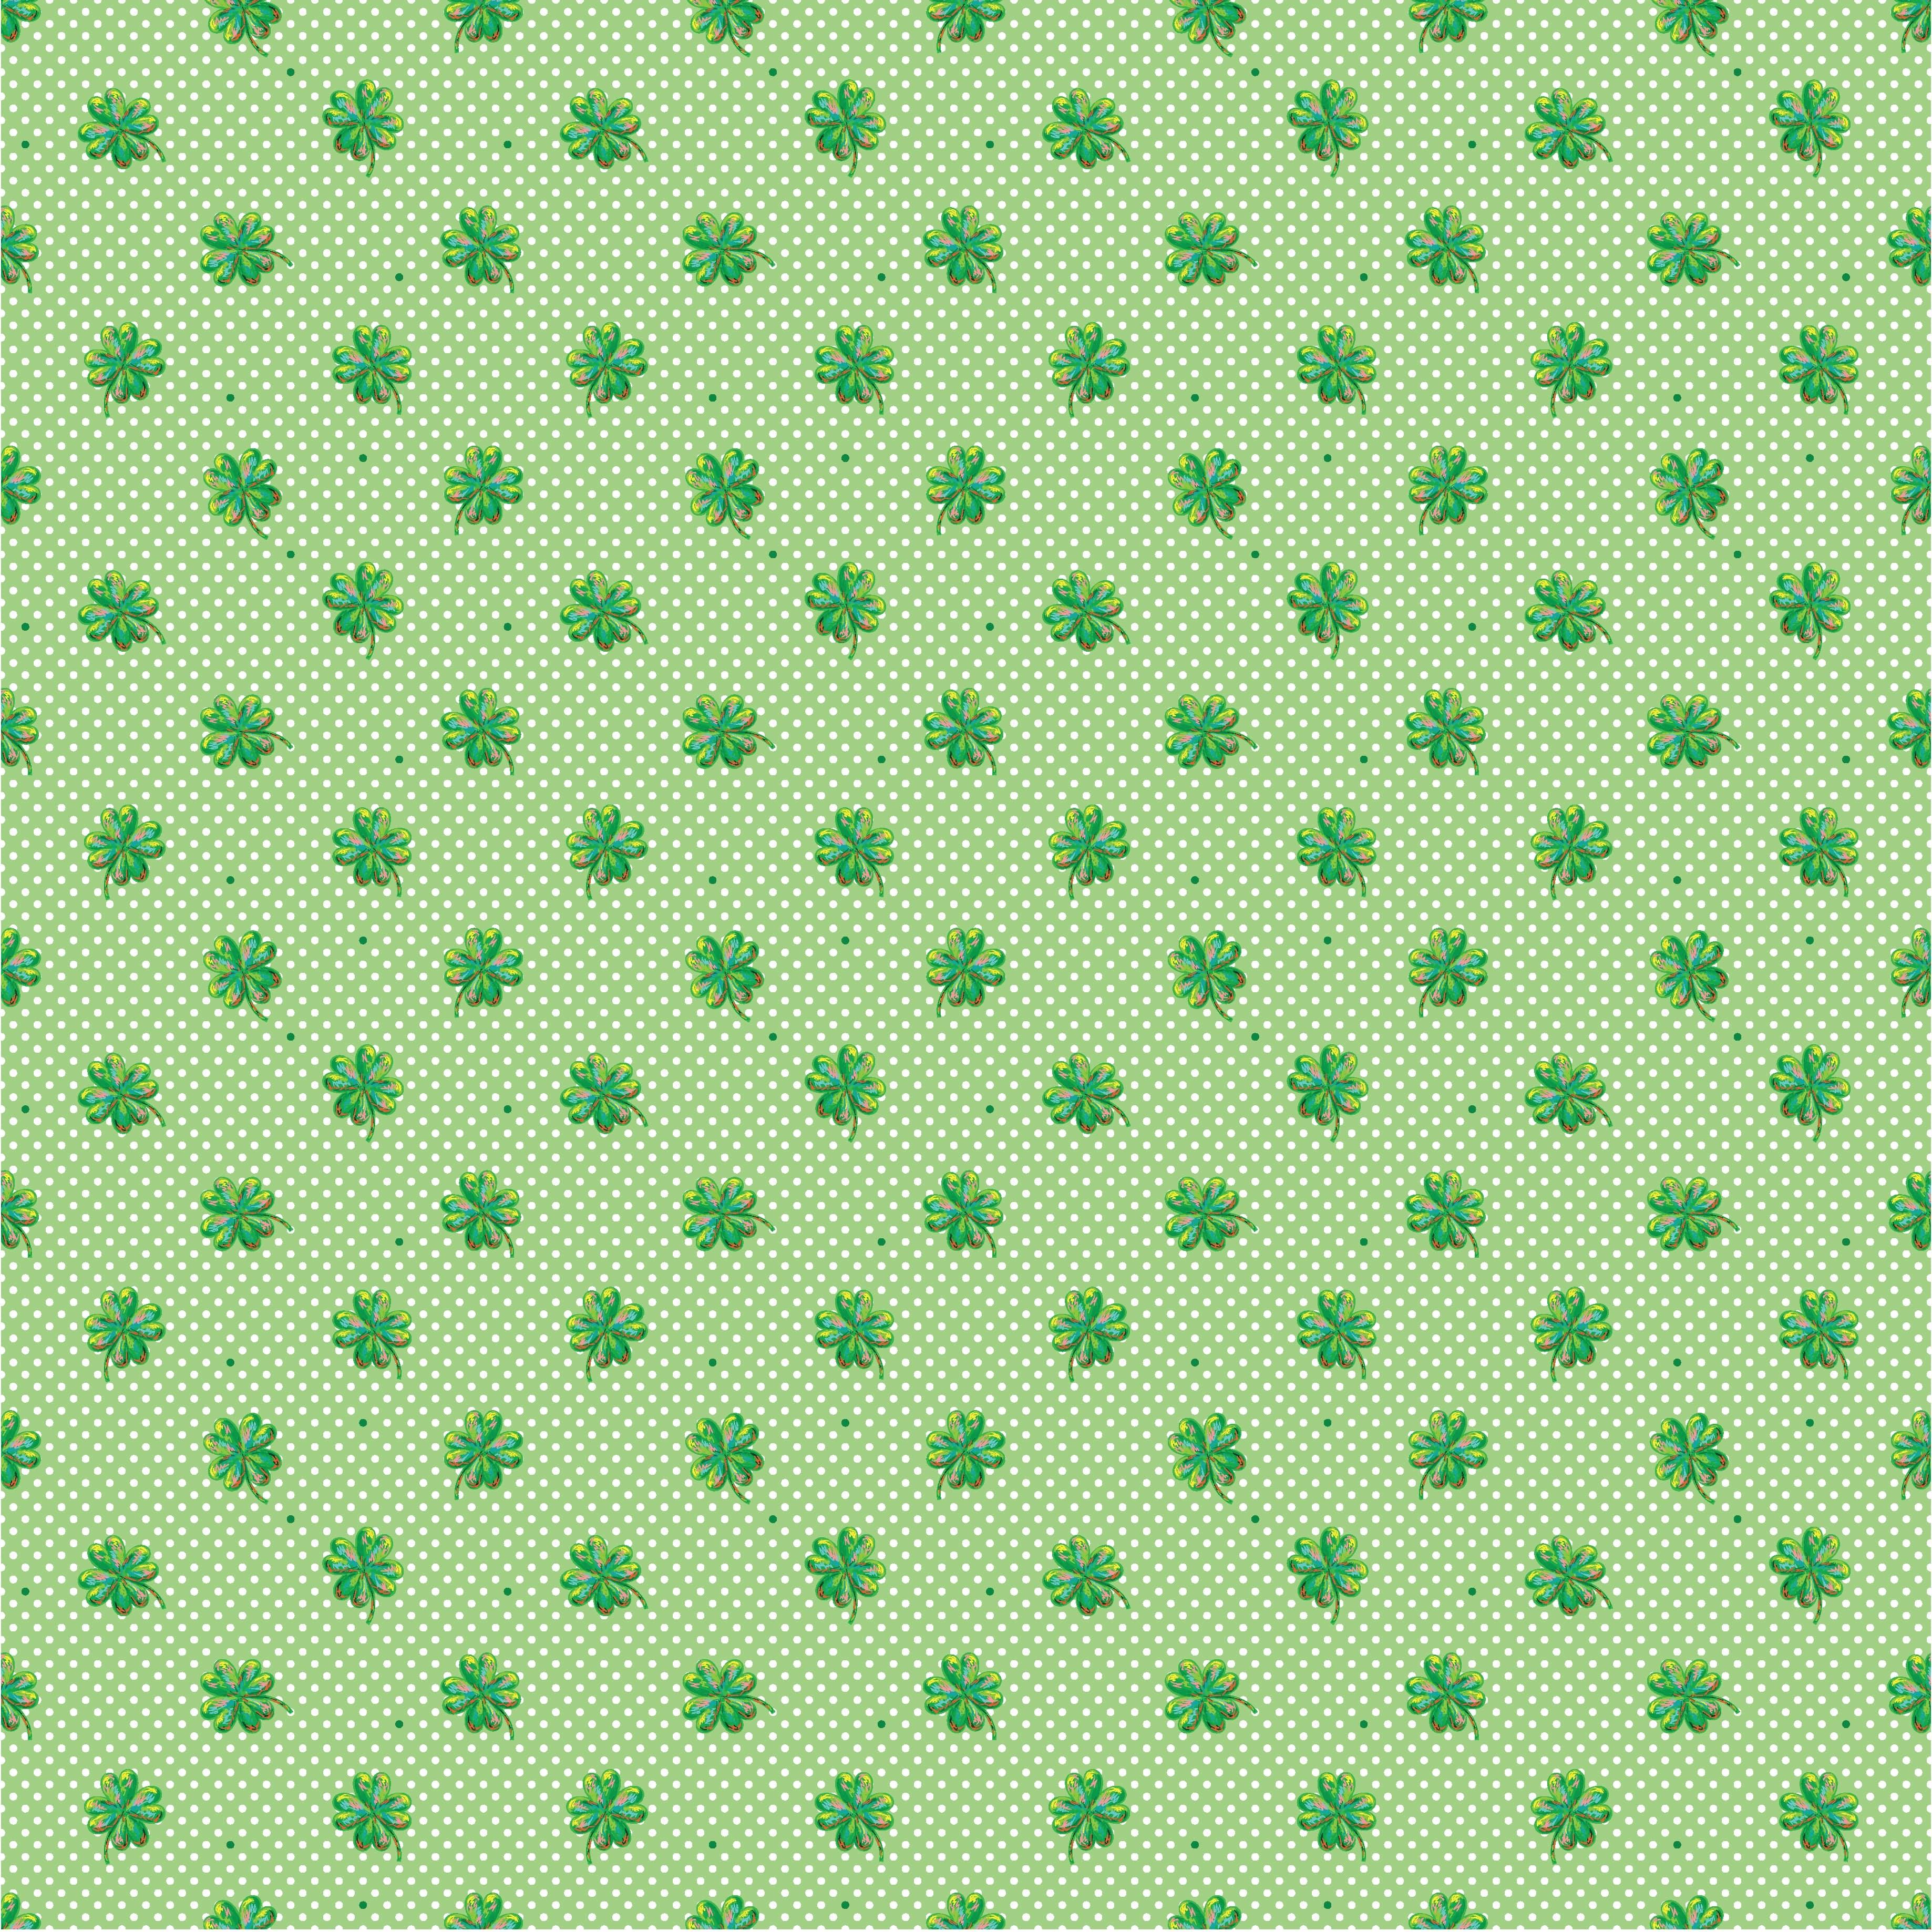 Lucky Irish Collection Lucky Day 12 x 12 Double-Sided Scrapbook Paper by Reminisce - Scrapbook Supply Companies